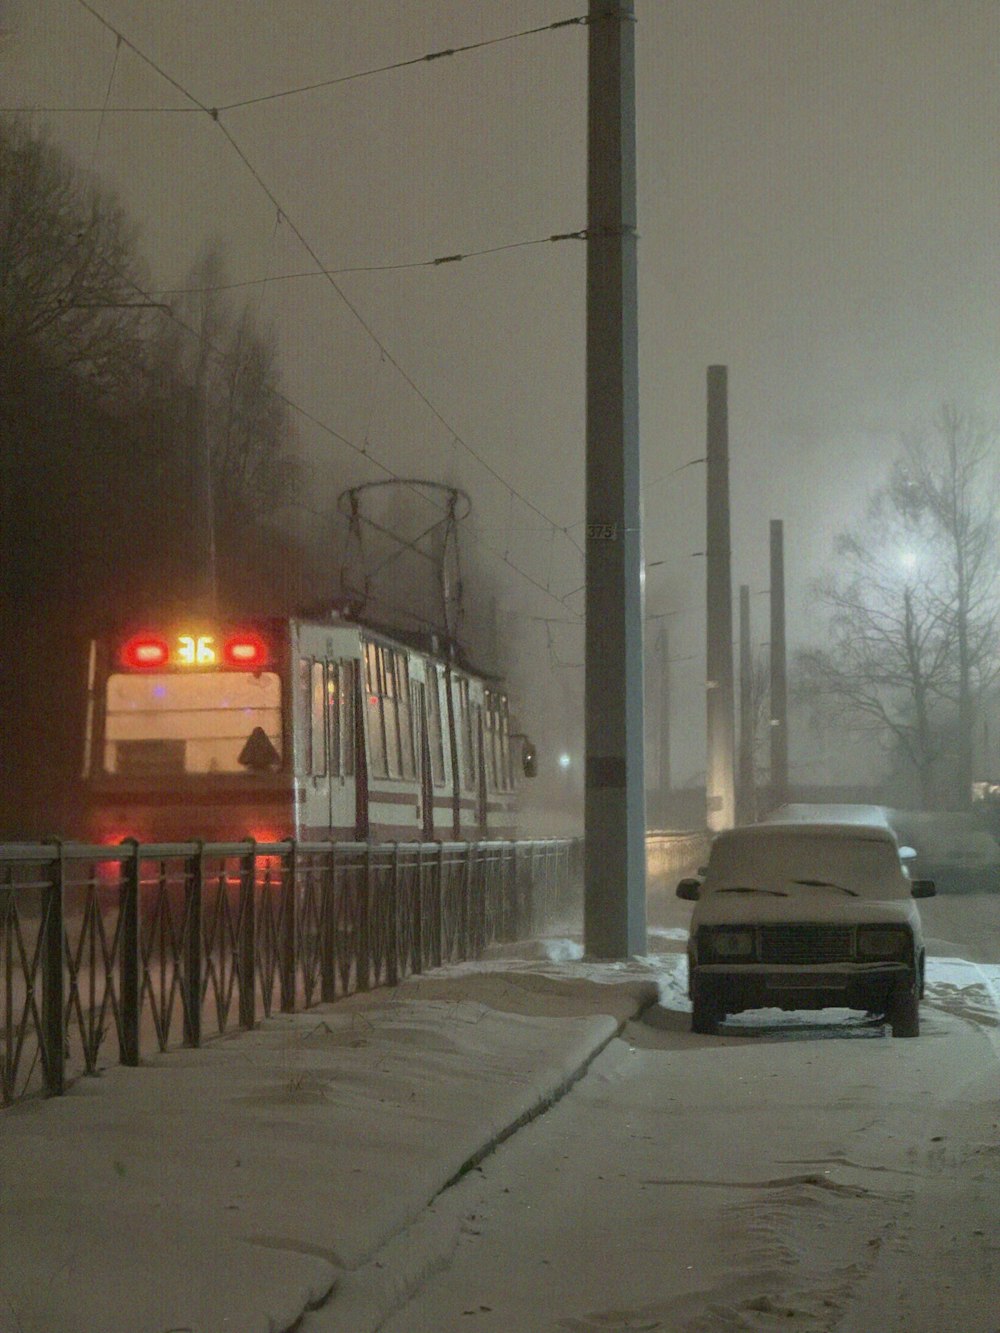 a train traveling down tracks next to a snow covered street